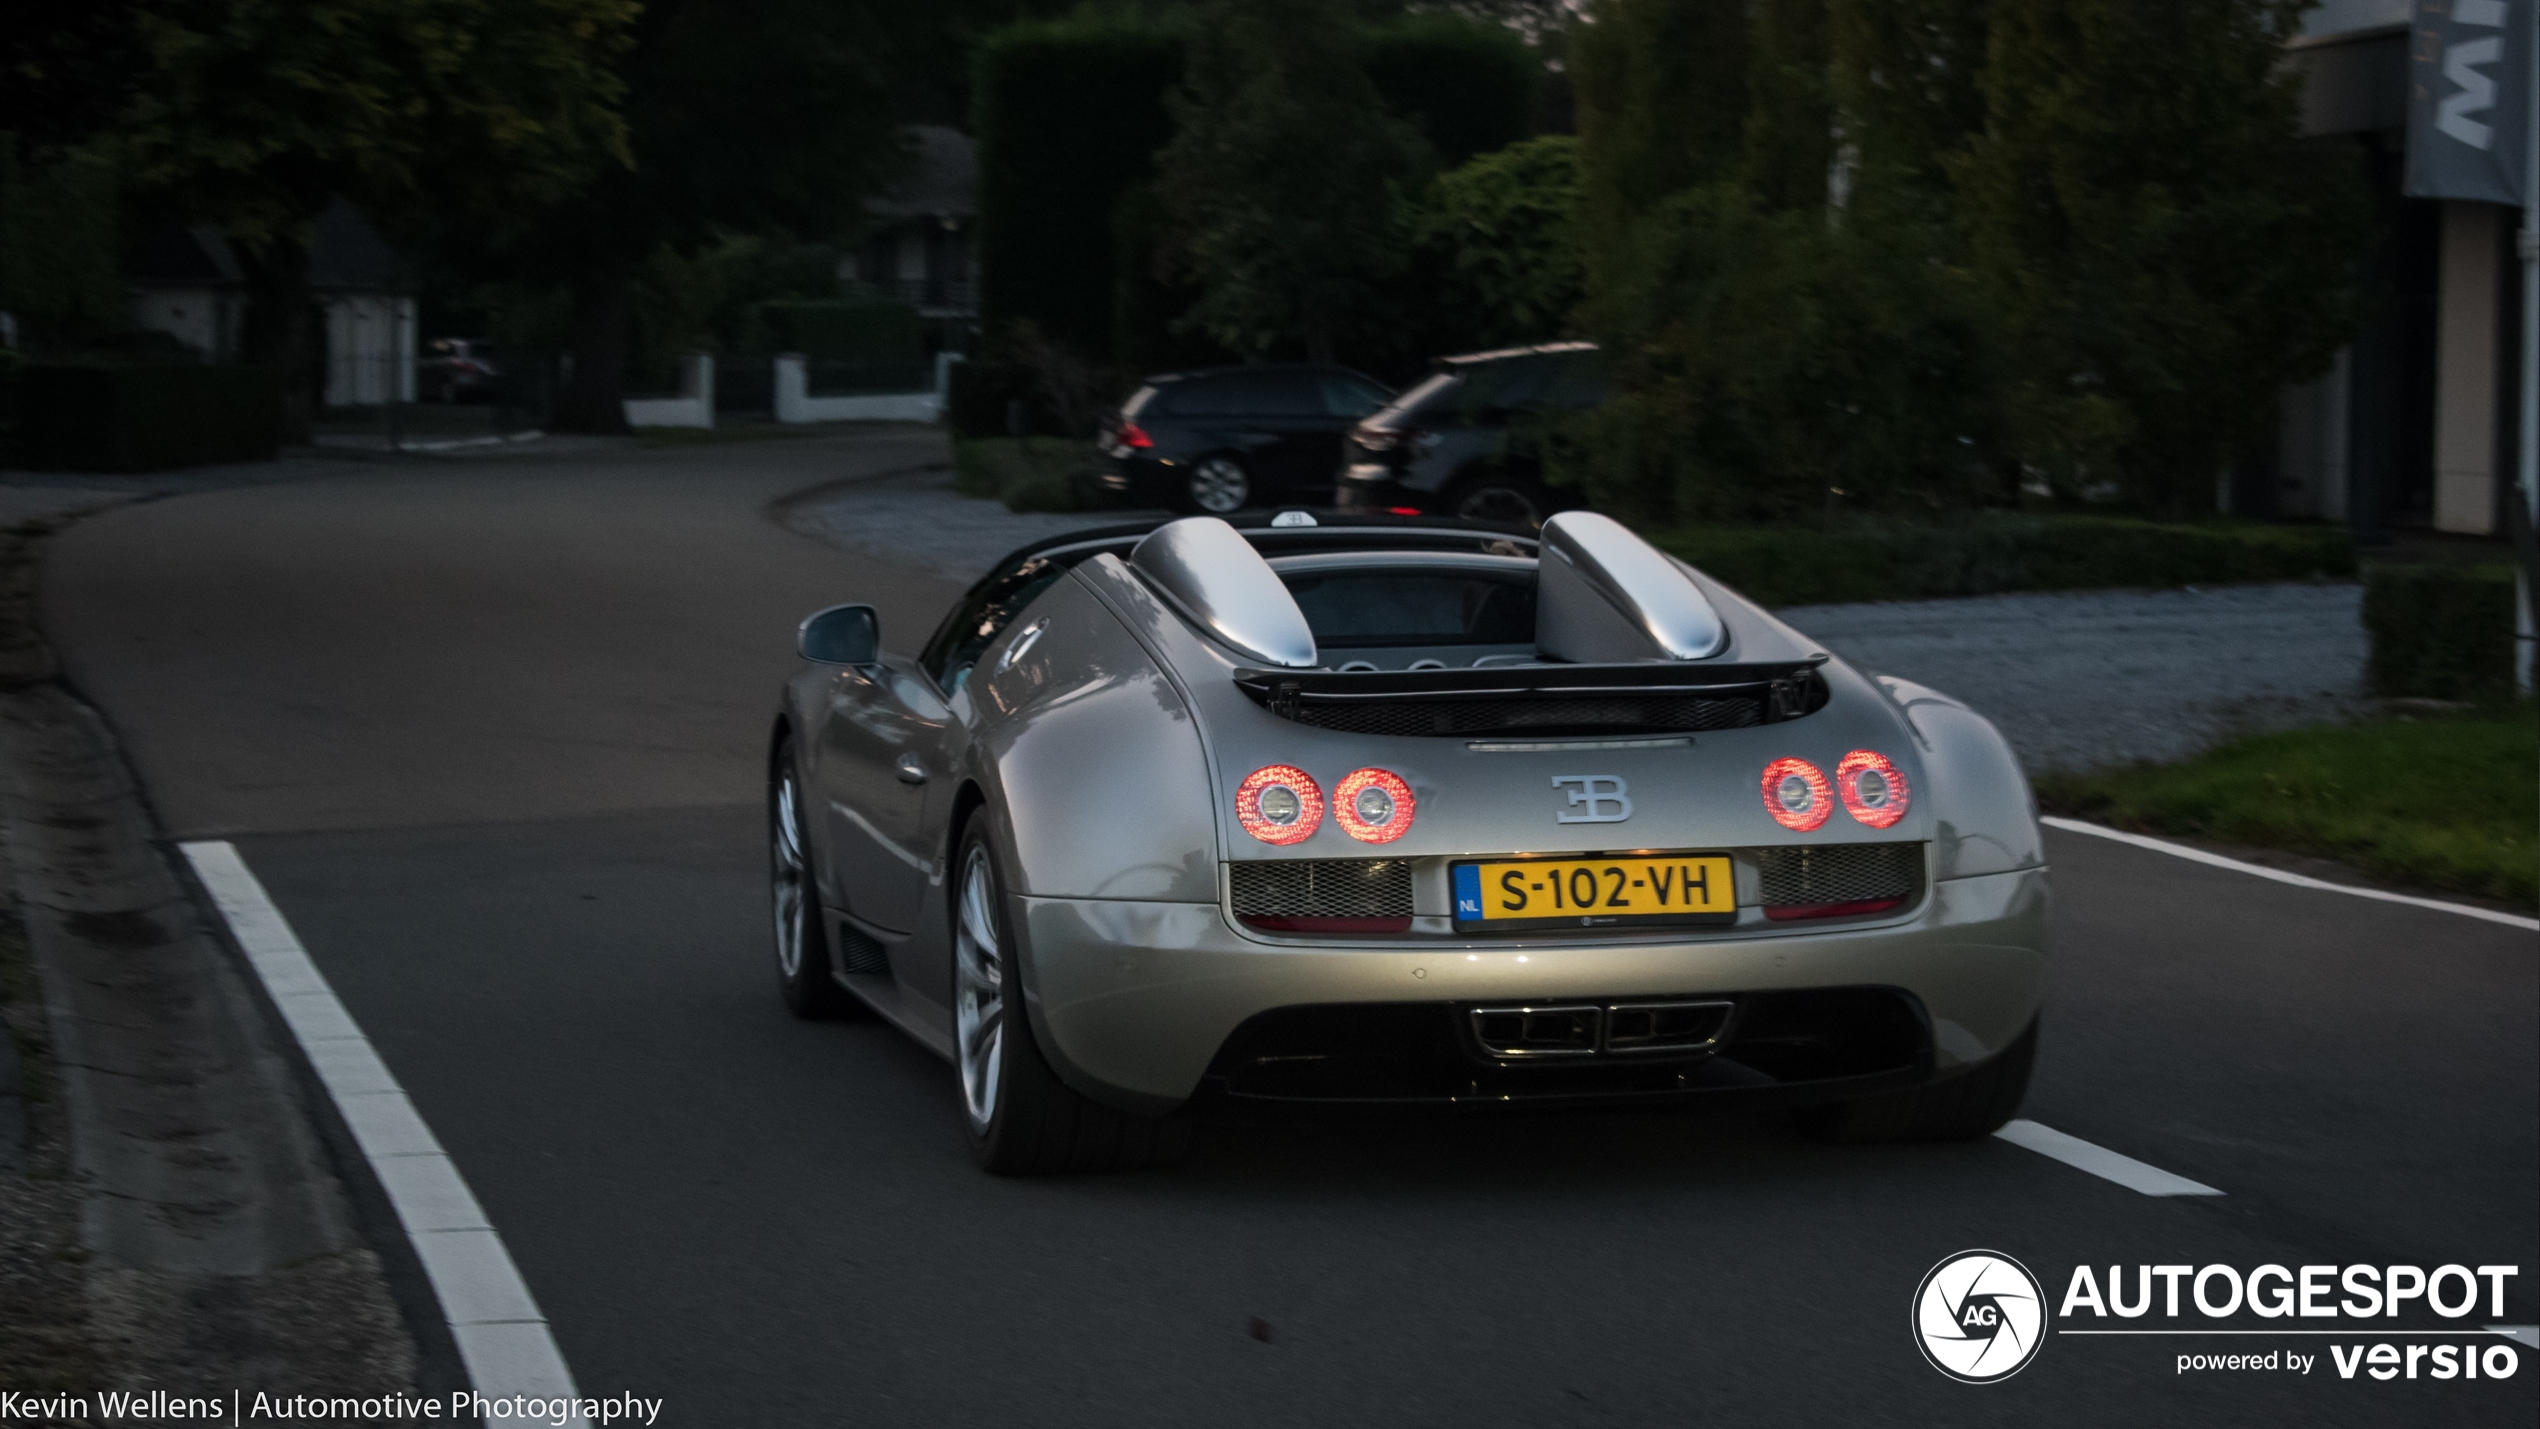 A beautiful Veyron Grand sport Vitesse shows up in Lanaken